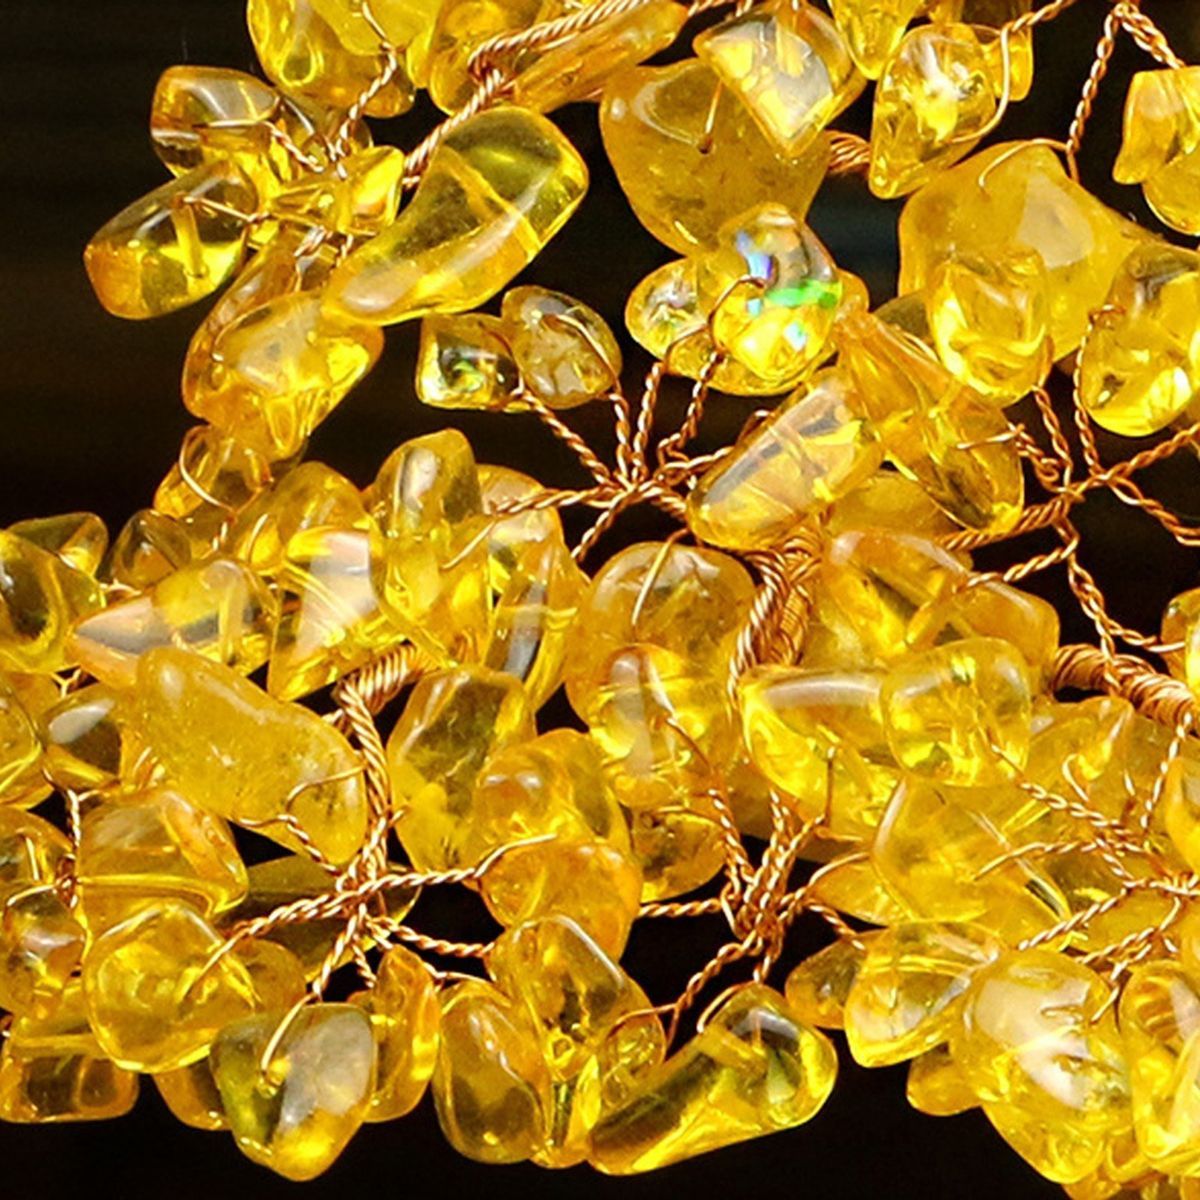 Yellow-Feng-Shui-Crystals-Gem-Stones-Fortune-Tree-Money-Tree-Wealth-Blessing-Home-Decorations-1650109